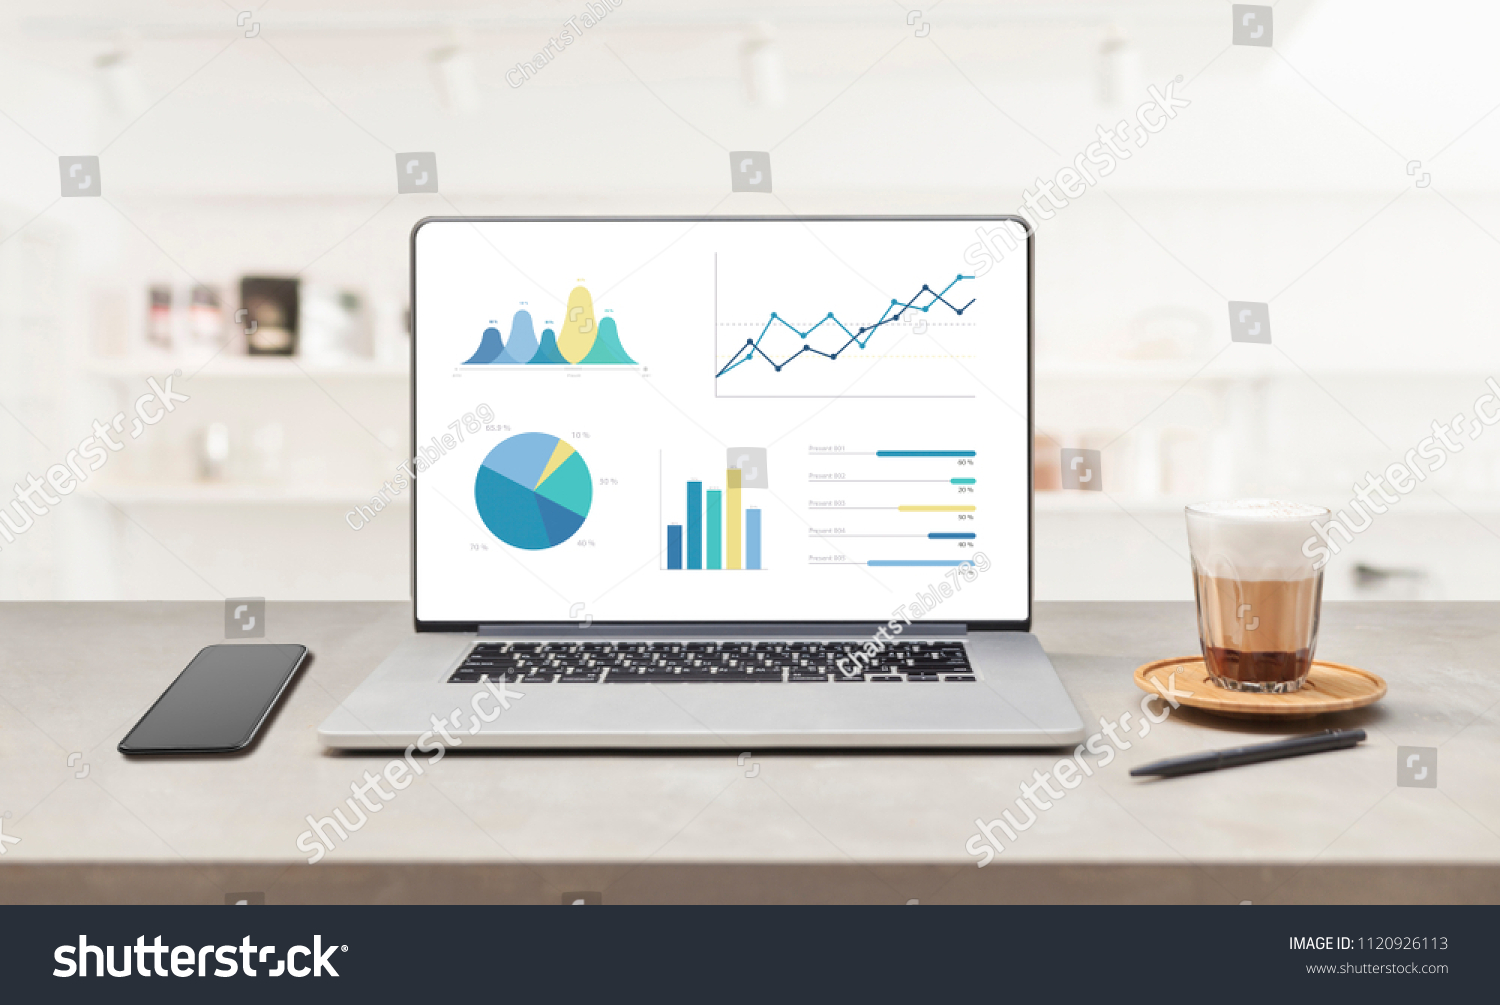 Laptop on wooden table showing charts and graph against white office room and windows background ,Analysis Business Accounting, Statistics Concept. #1120926113